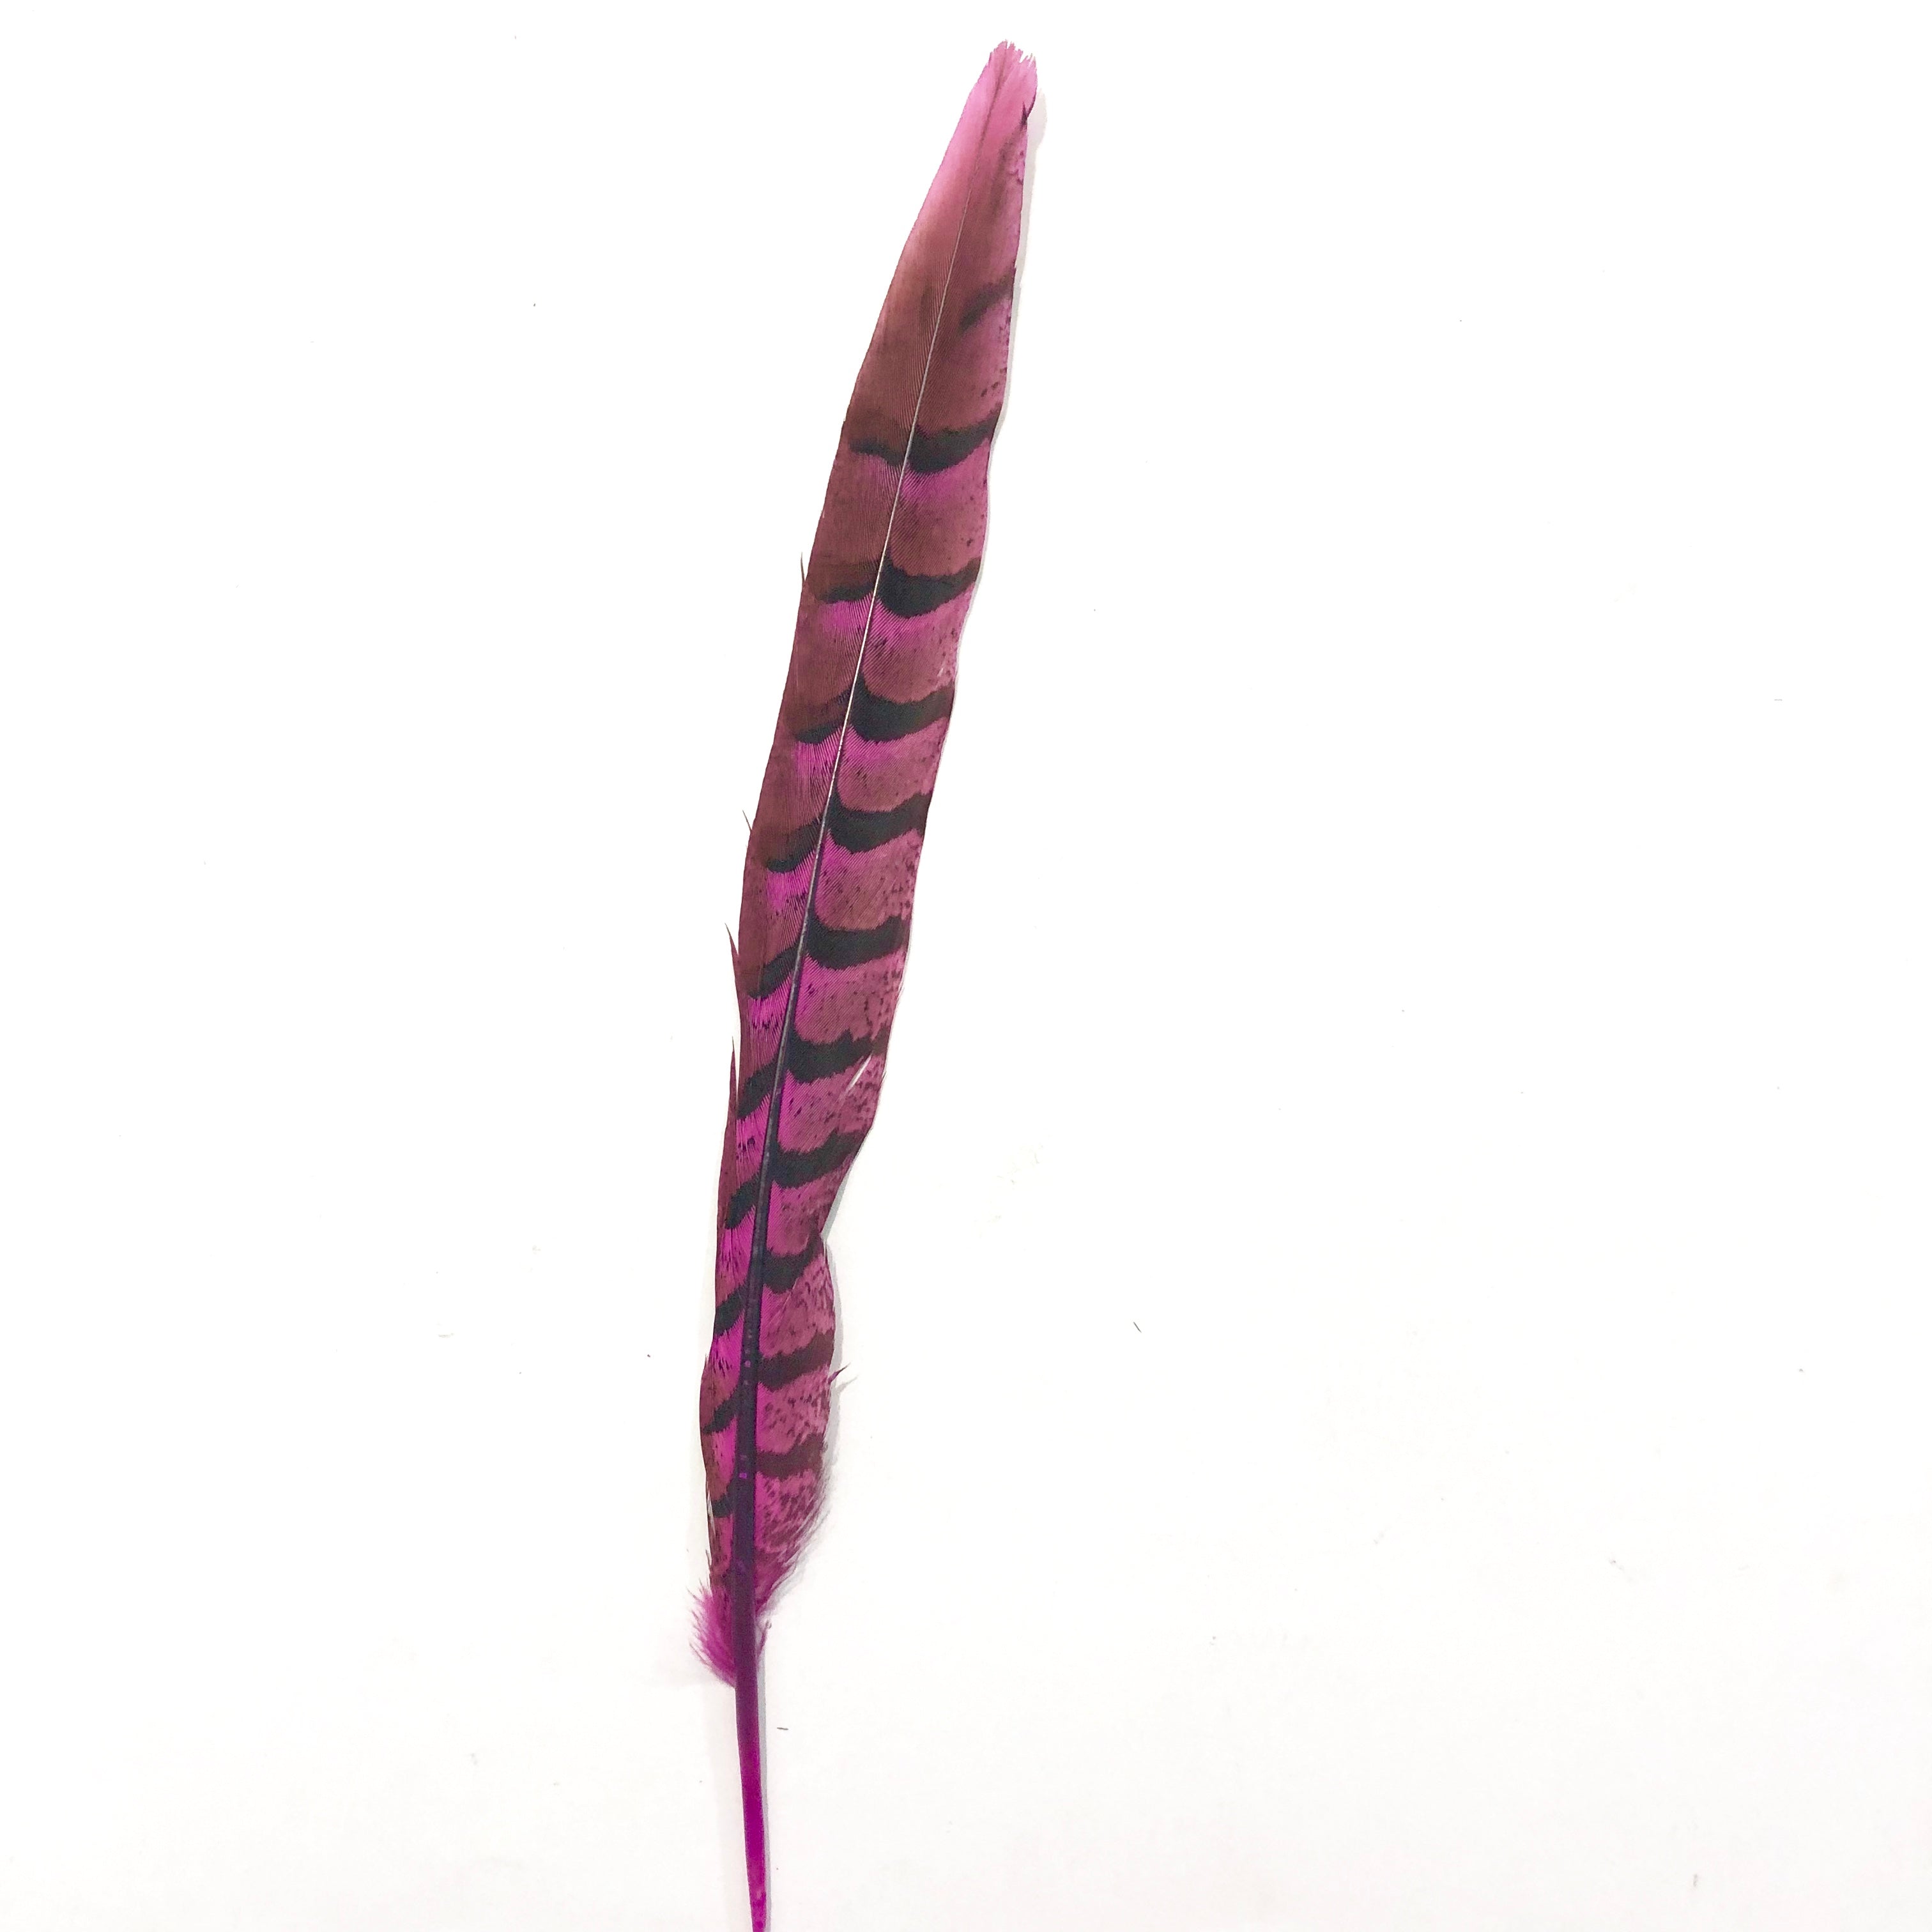 12" to 14" Reeves Pheasant Tail Feather - Hot Pink ((SECONDS))